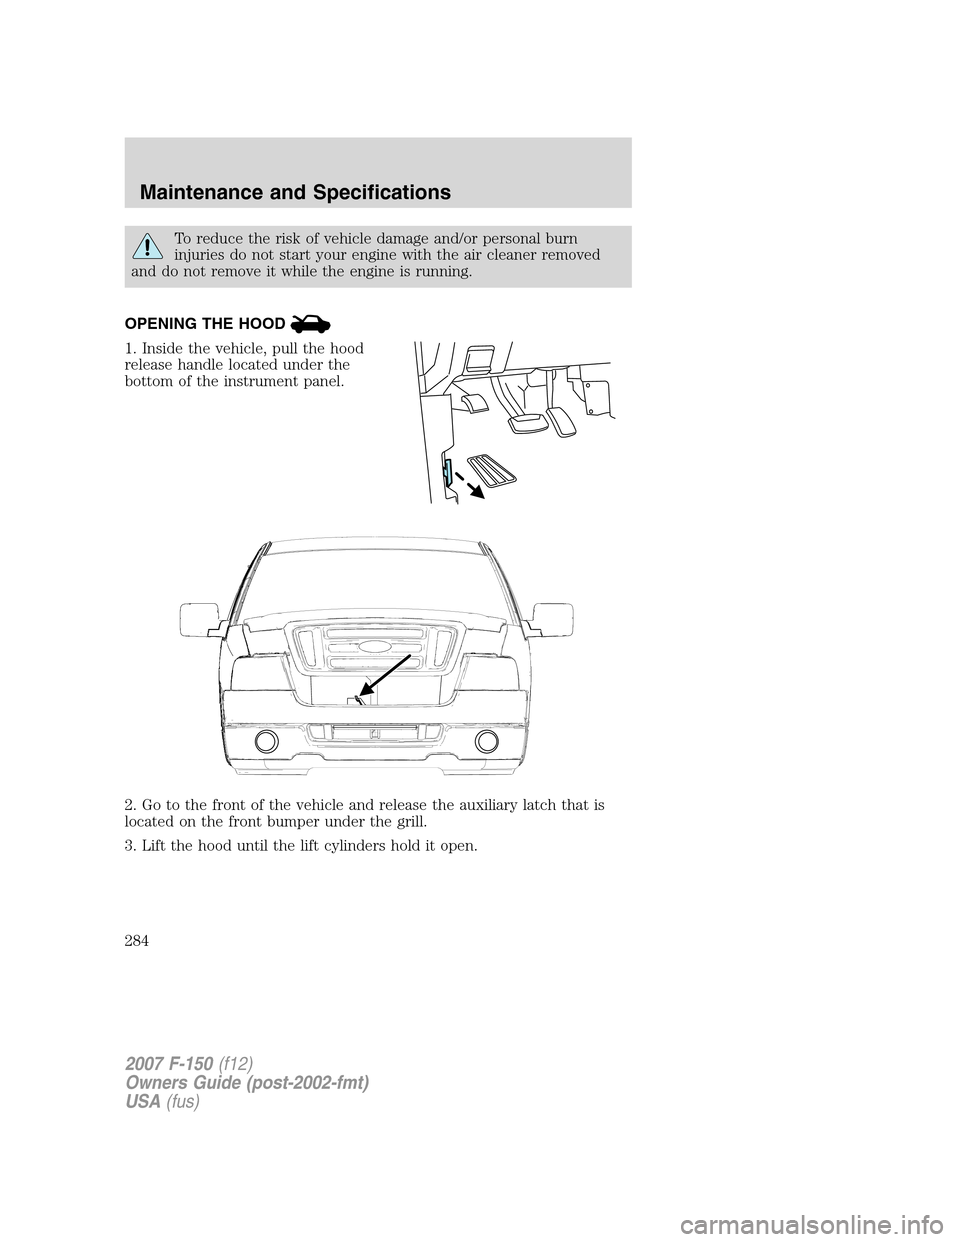 FORD F150 2007 11.G Owners Manual To reduce the risk of vehicle damage and/or personal burn
injuries do not start your engine with the air cleaner removed
and do not remove it while the engine is running.
OPENING THE HOOD
1. Inside th